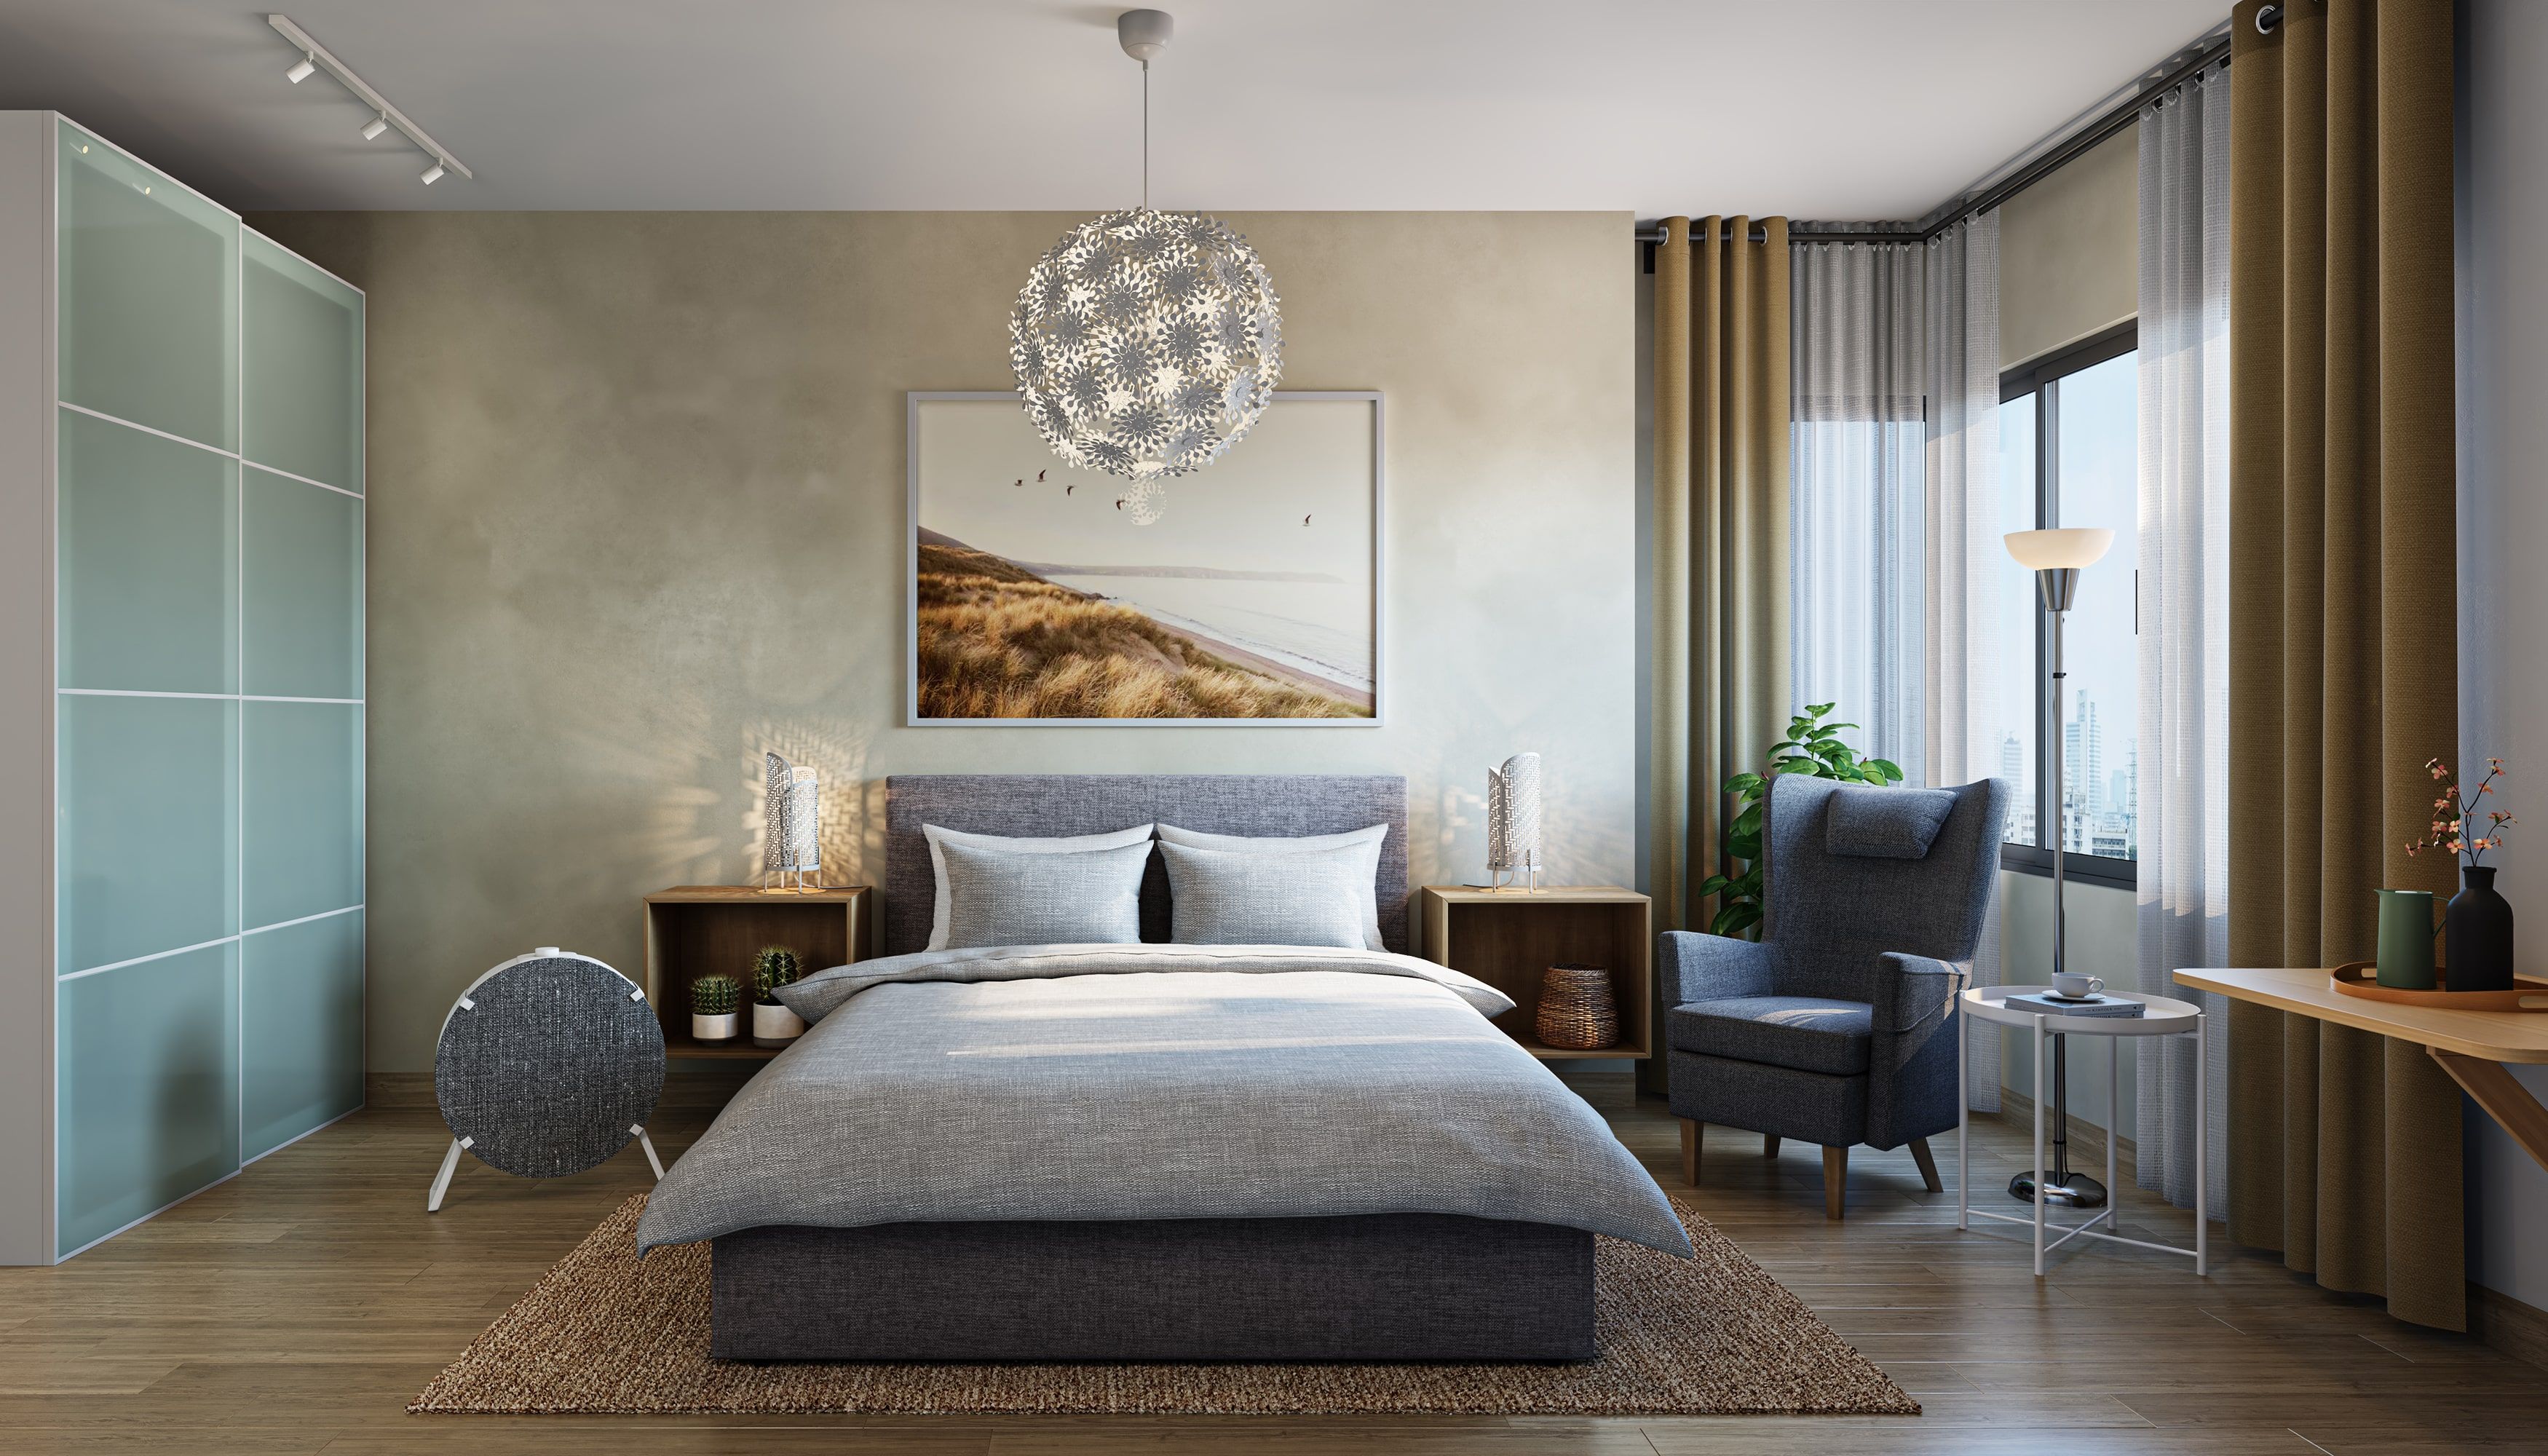 Modern Master Bedroom Design With Beige Textured Wall And Grey Upholstered Bed